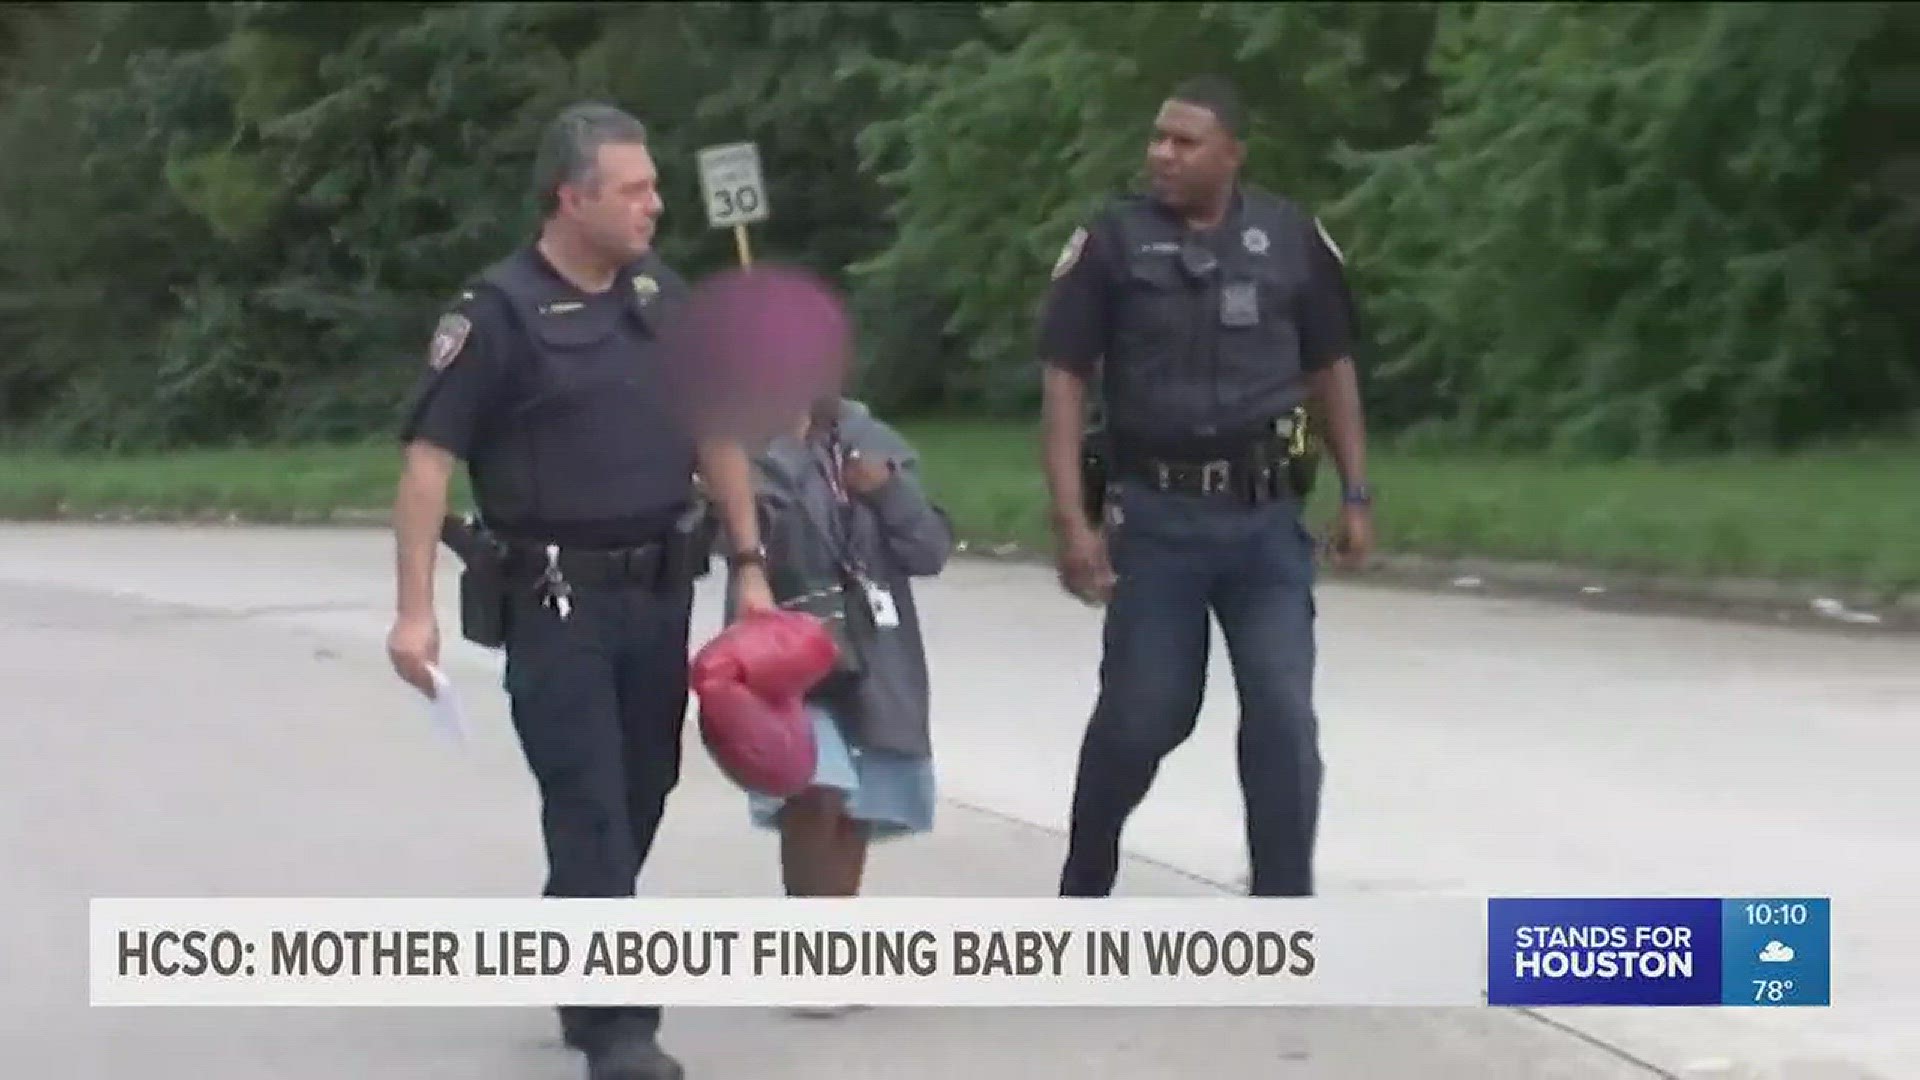 A teenager who called 911 and said she found a newborn baby abandoned in a wooded area made up the story, according to Sheriff Ed Gonzalez.